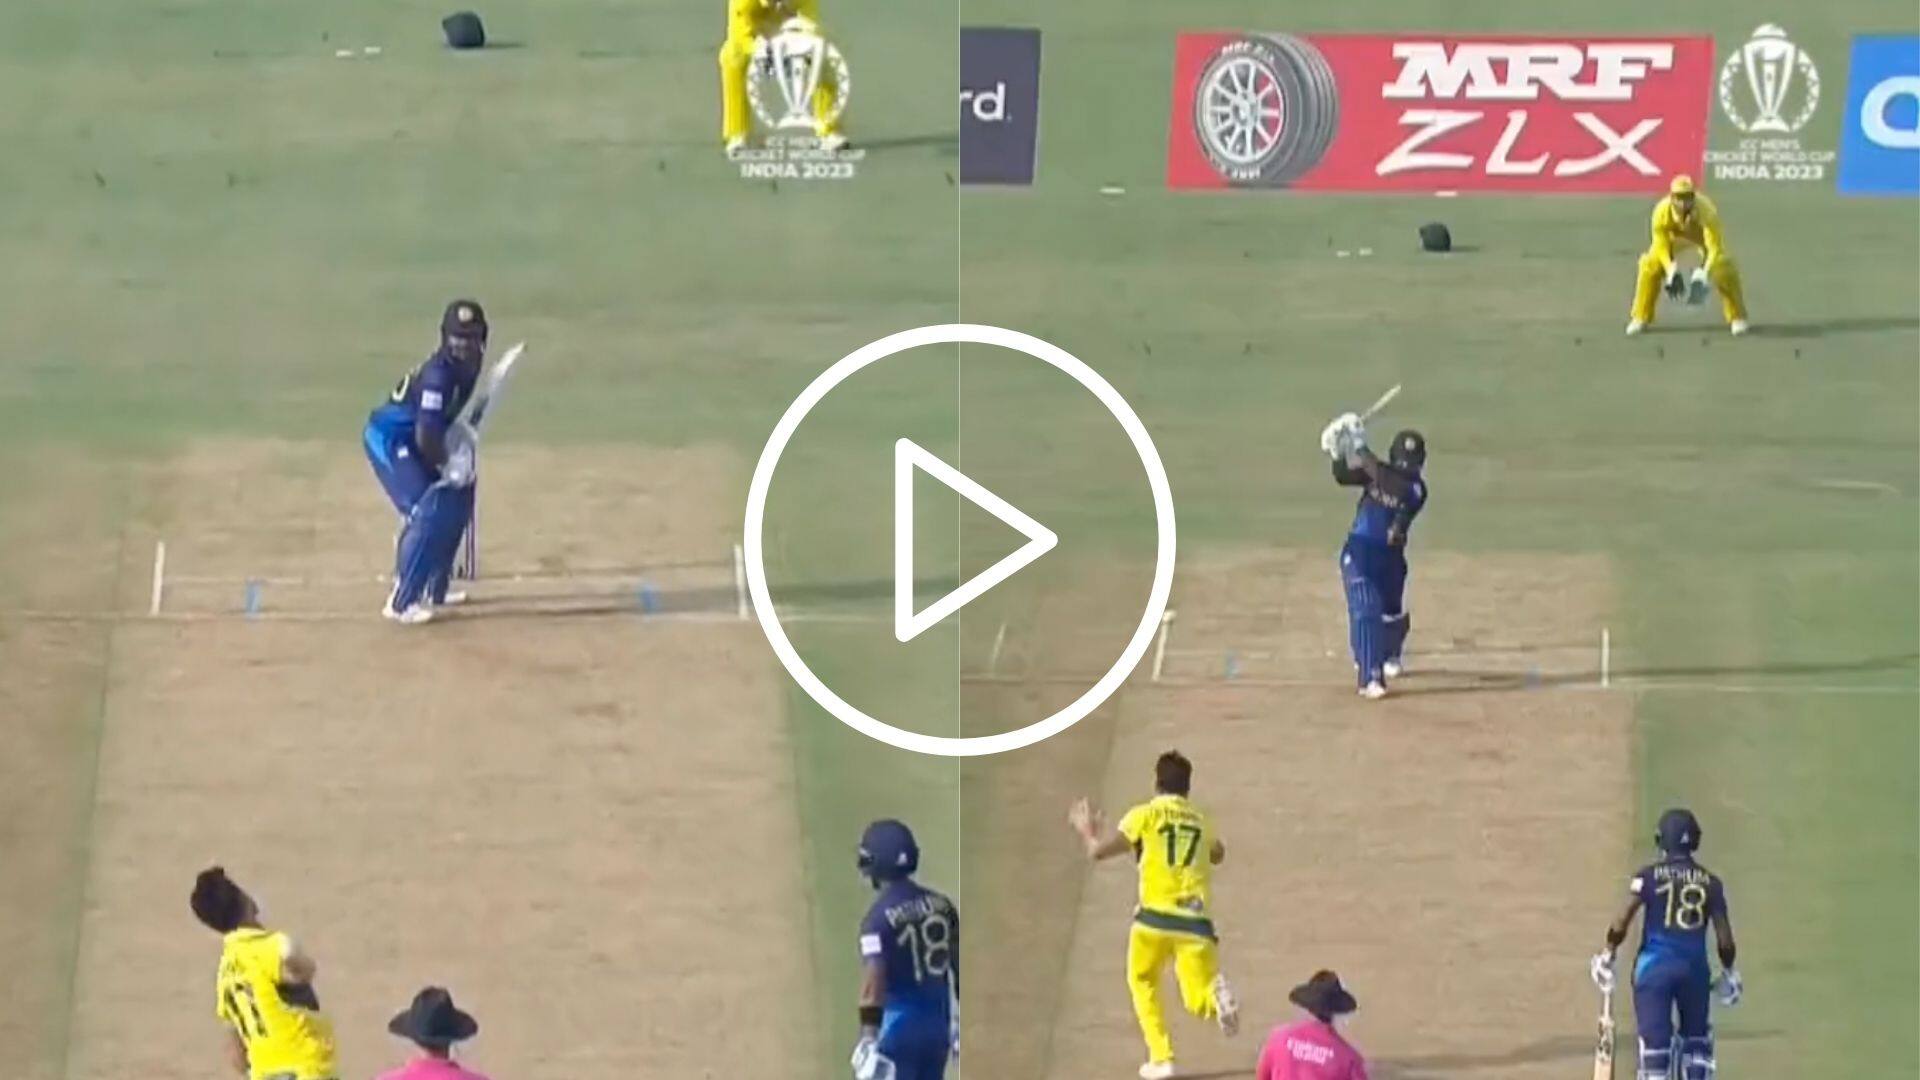 [Watch] Kusal Perera Stuns Marcus Stoinis With Handsome Four; Gets To 50 In Style